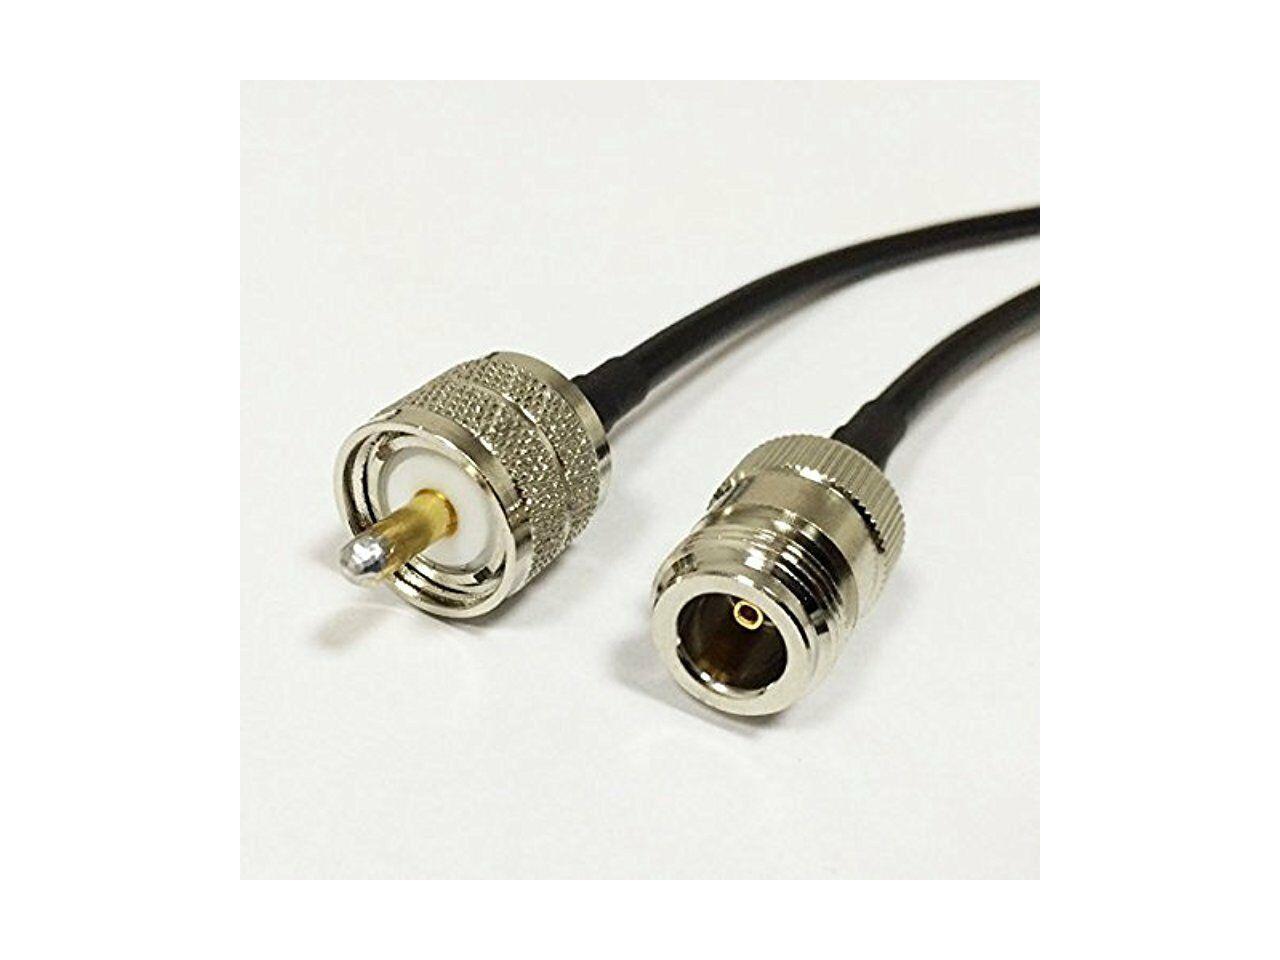 USA-CA RFC195 N FEMALE BULKHEAD to PL259 UHF MALE Coaxial RF Pigtail Cable 